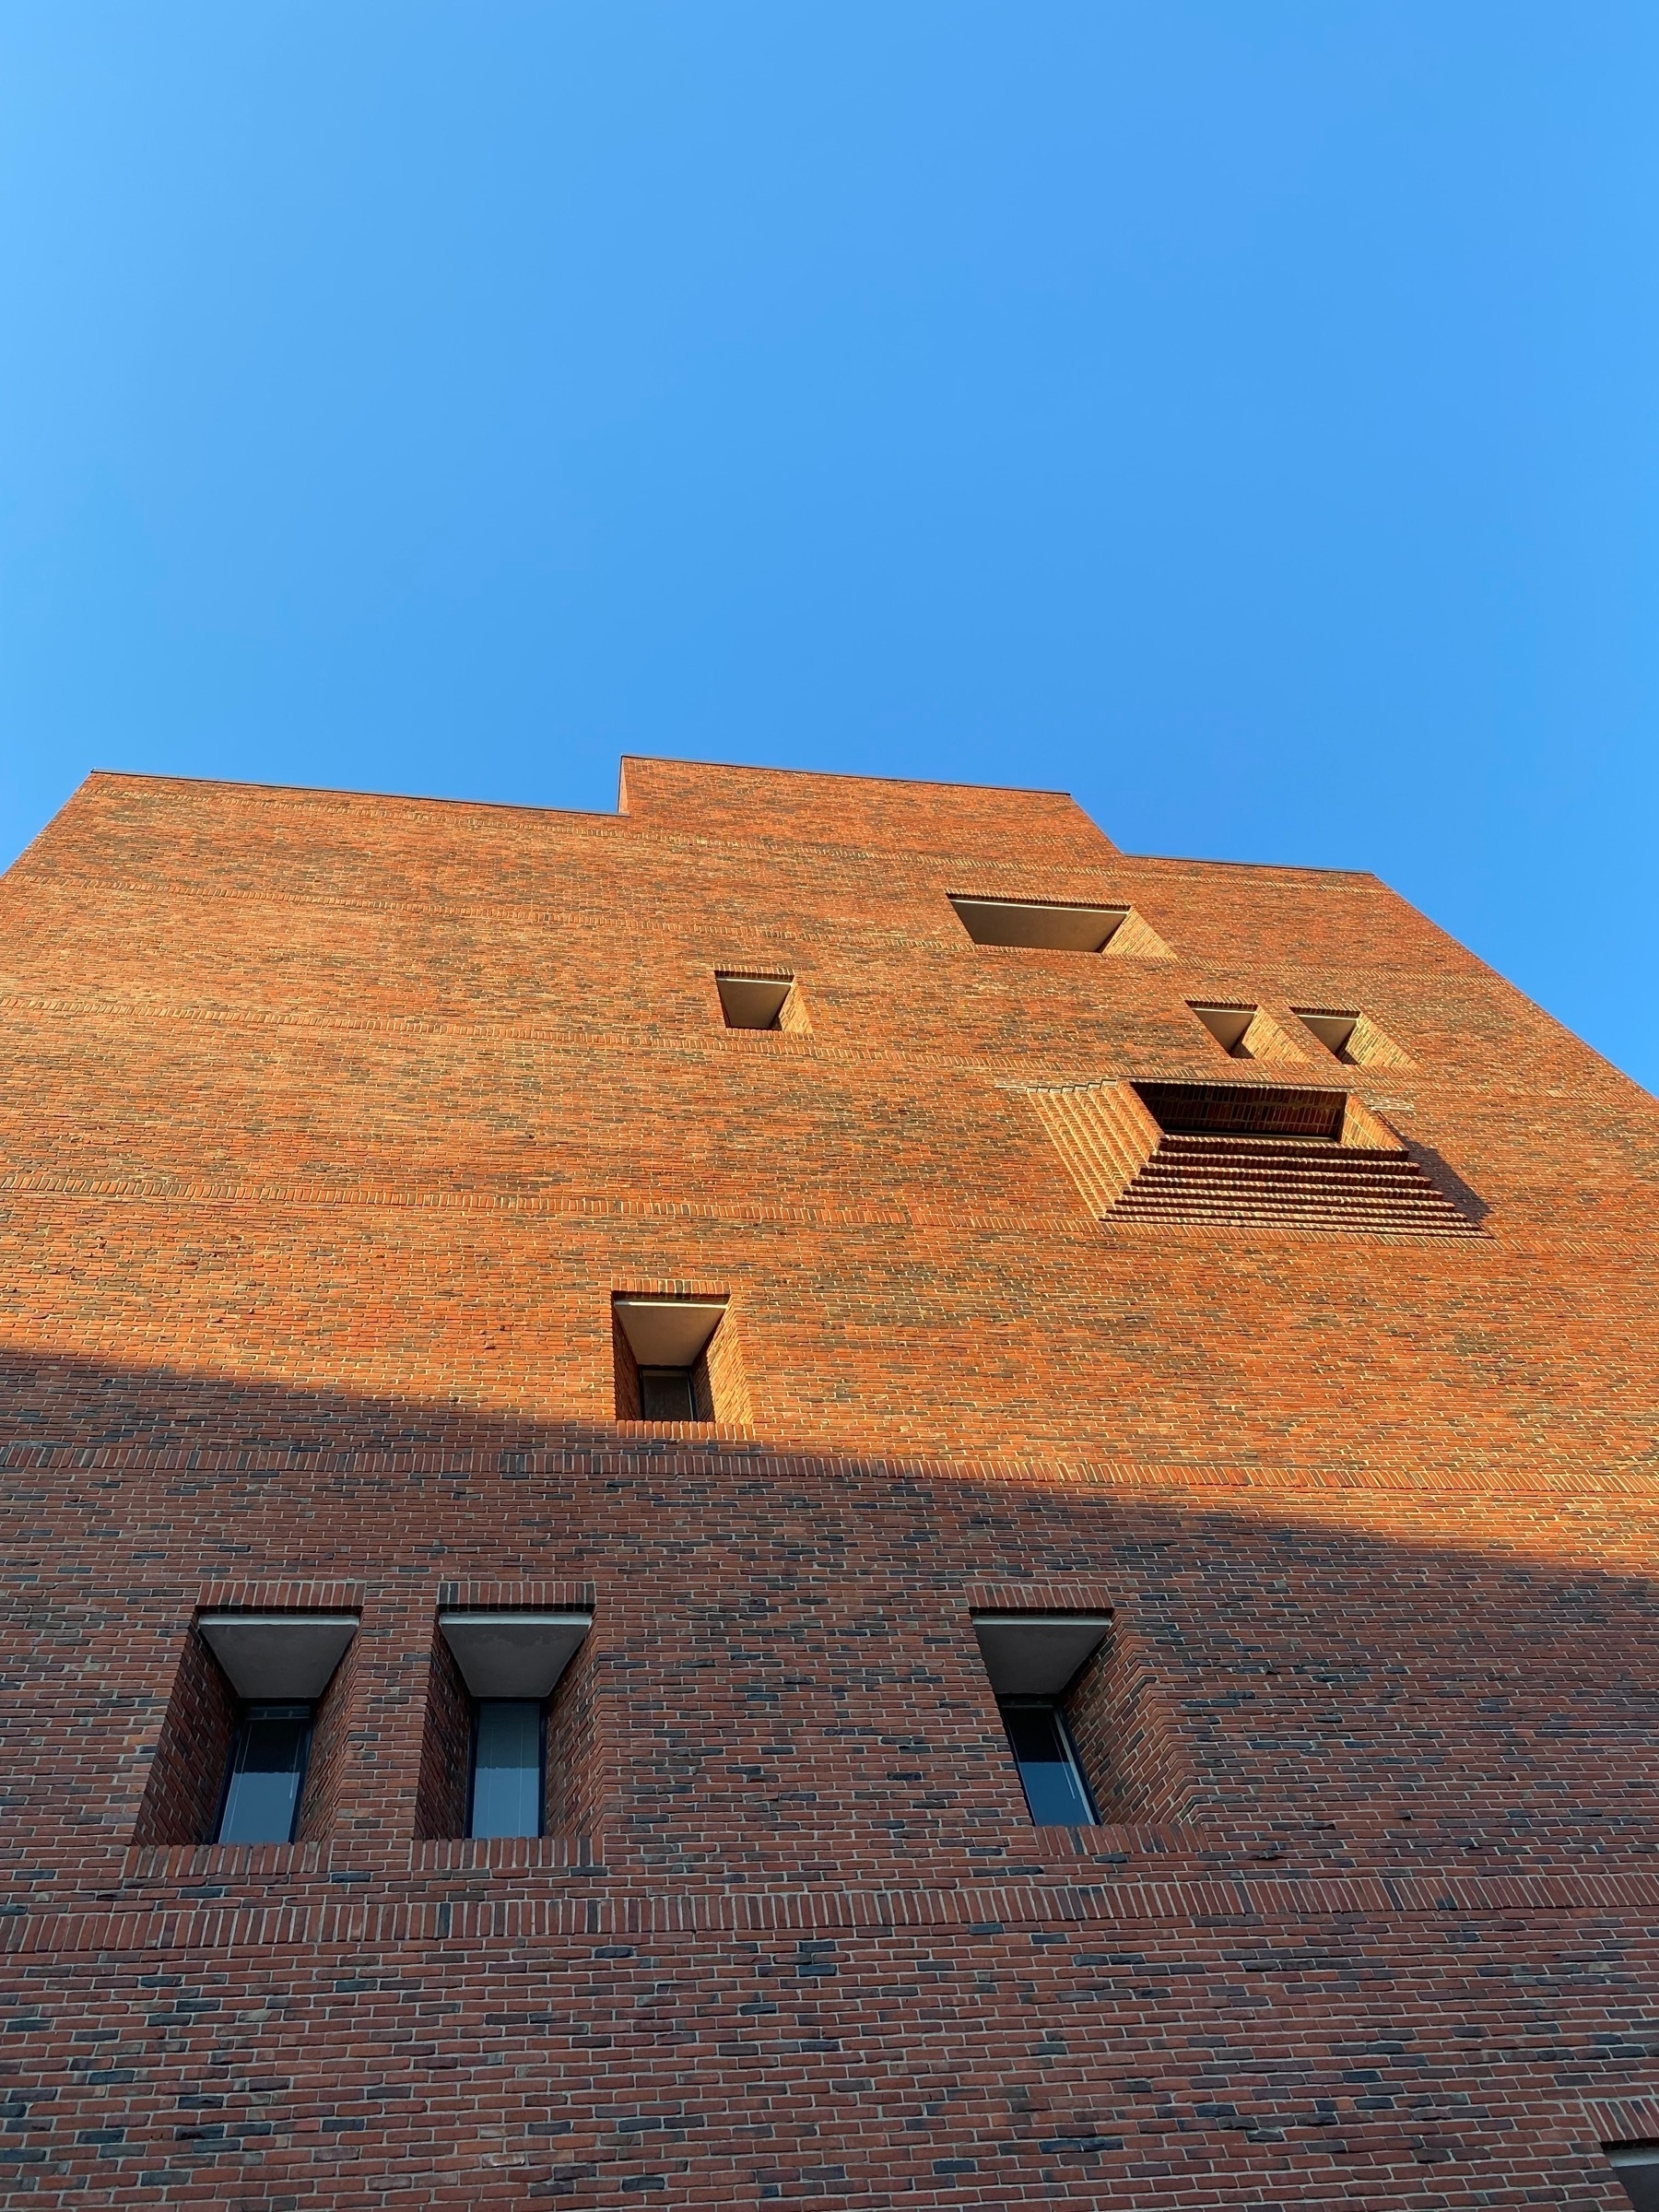 View up the side of a tall brick building, with sunlight on the top and the blue sky behind.